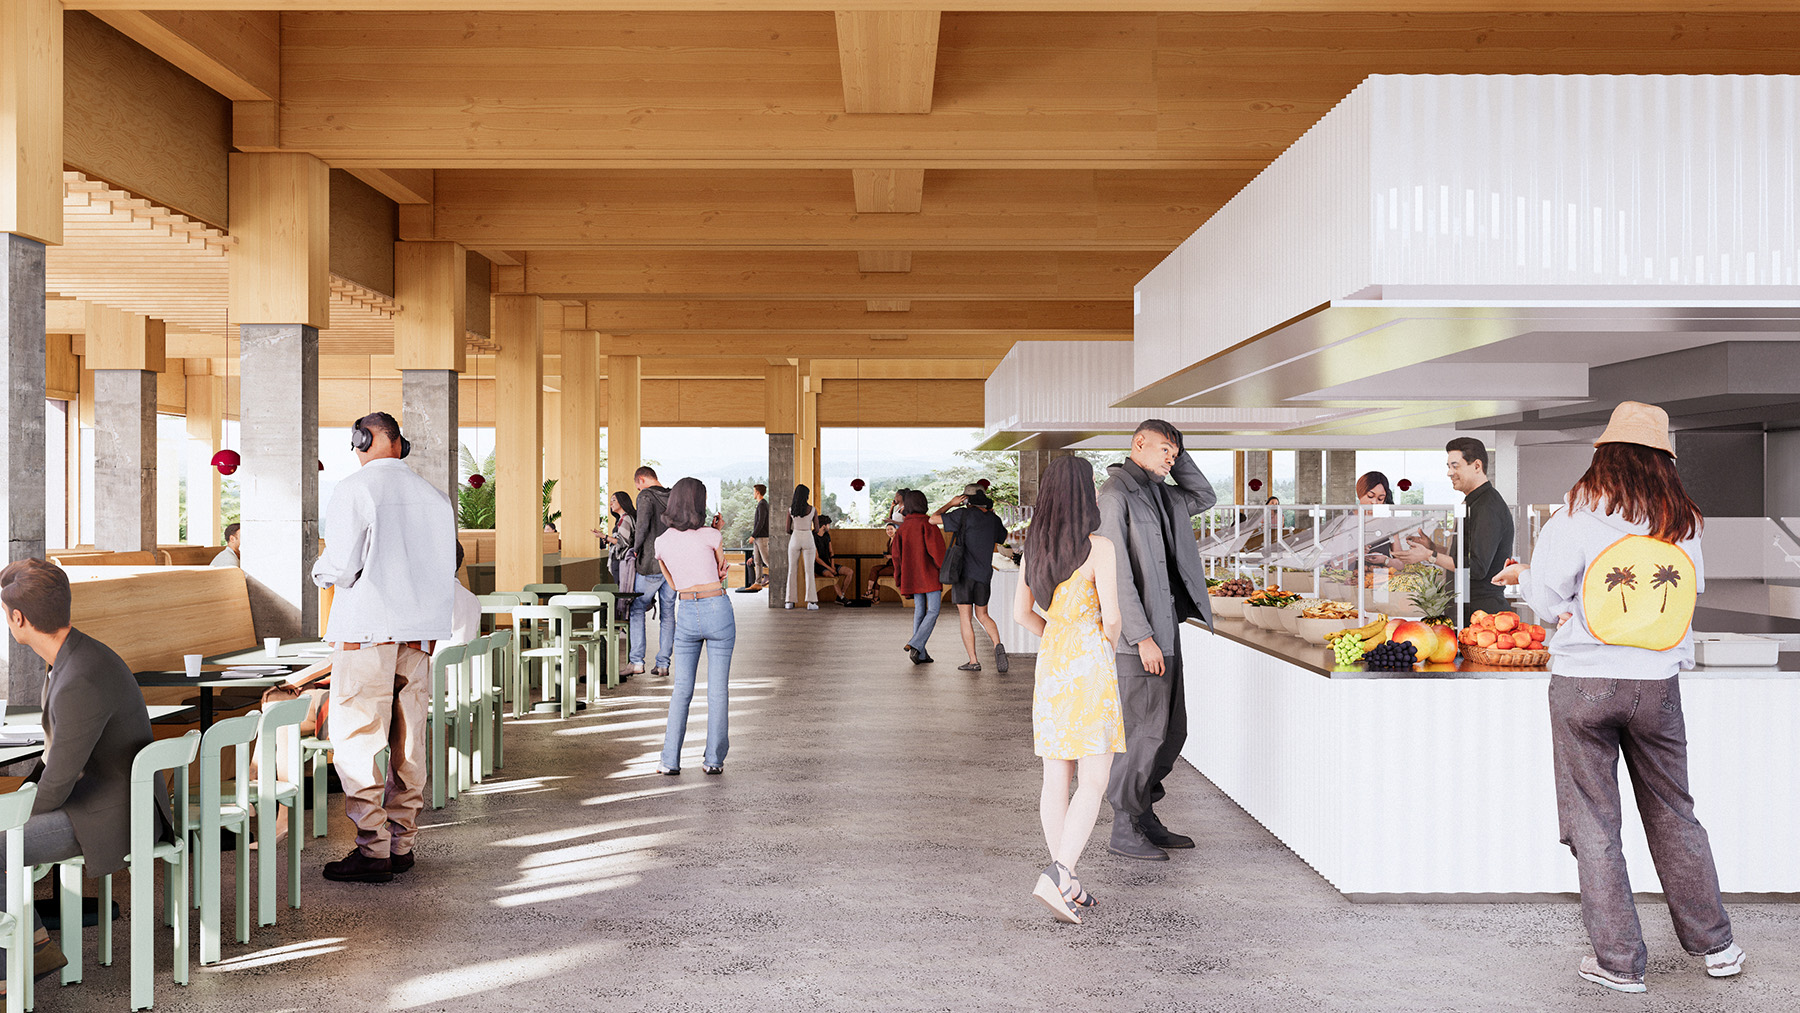 A rendering of a modern looking cafe and food area